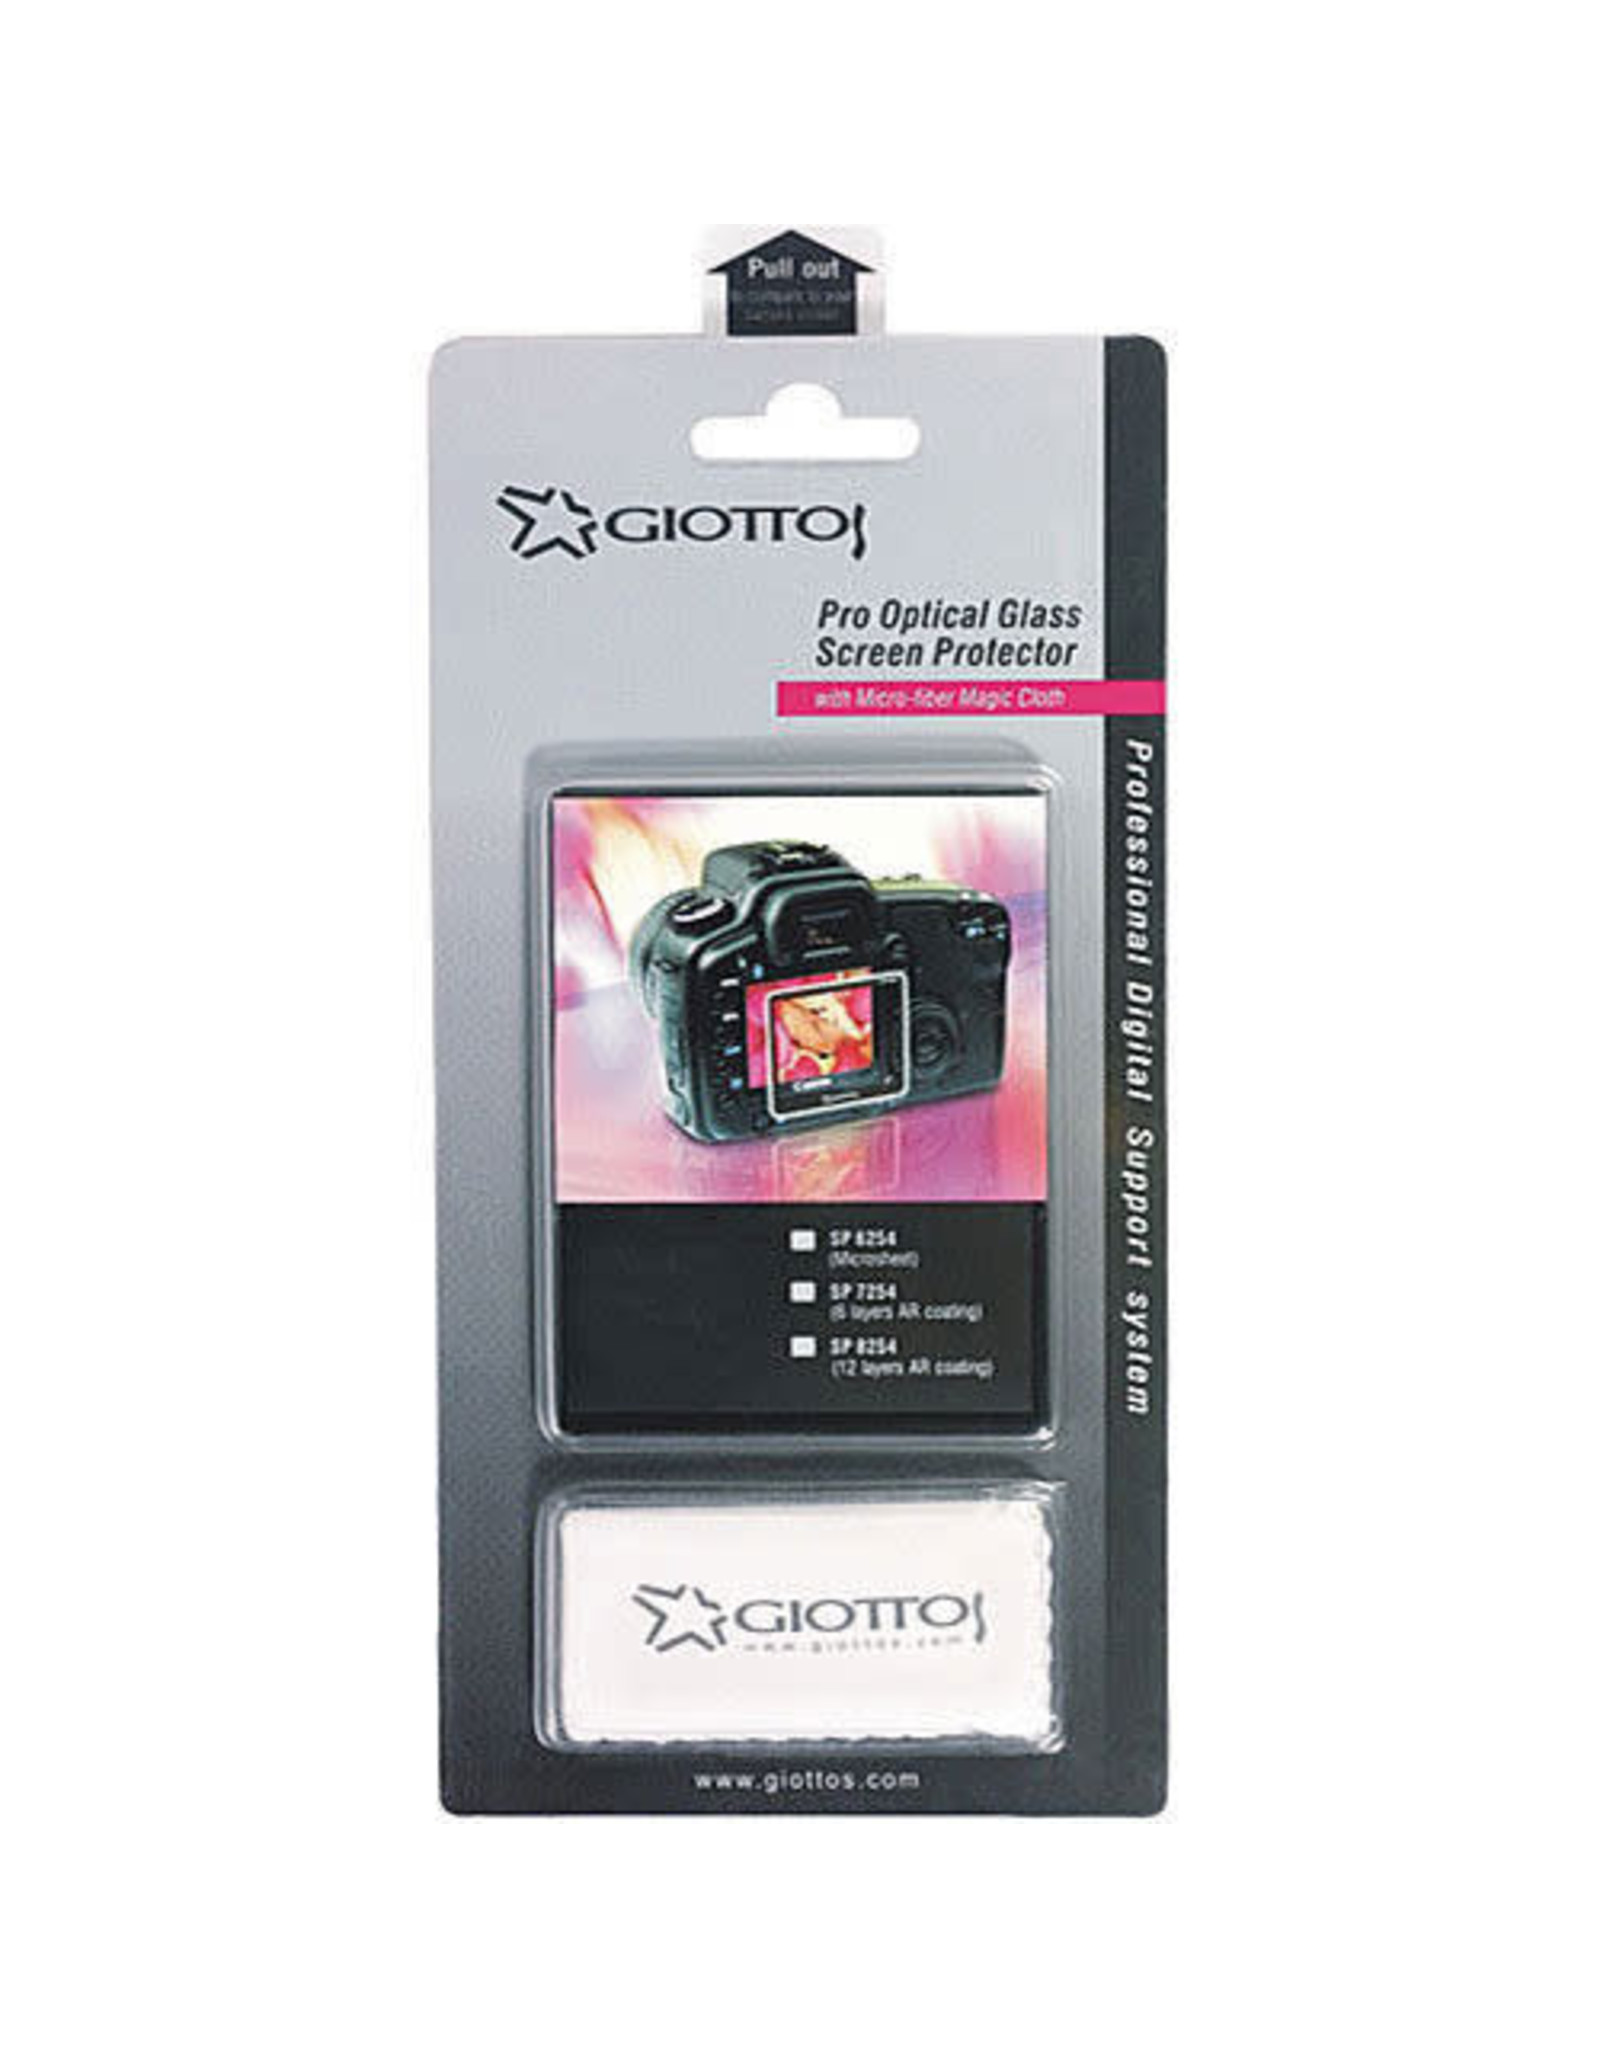 Giottos Aegis Professional M-C Schott Glass Screen Protector for Wide 2.5" LCDs